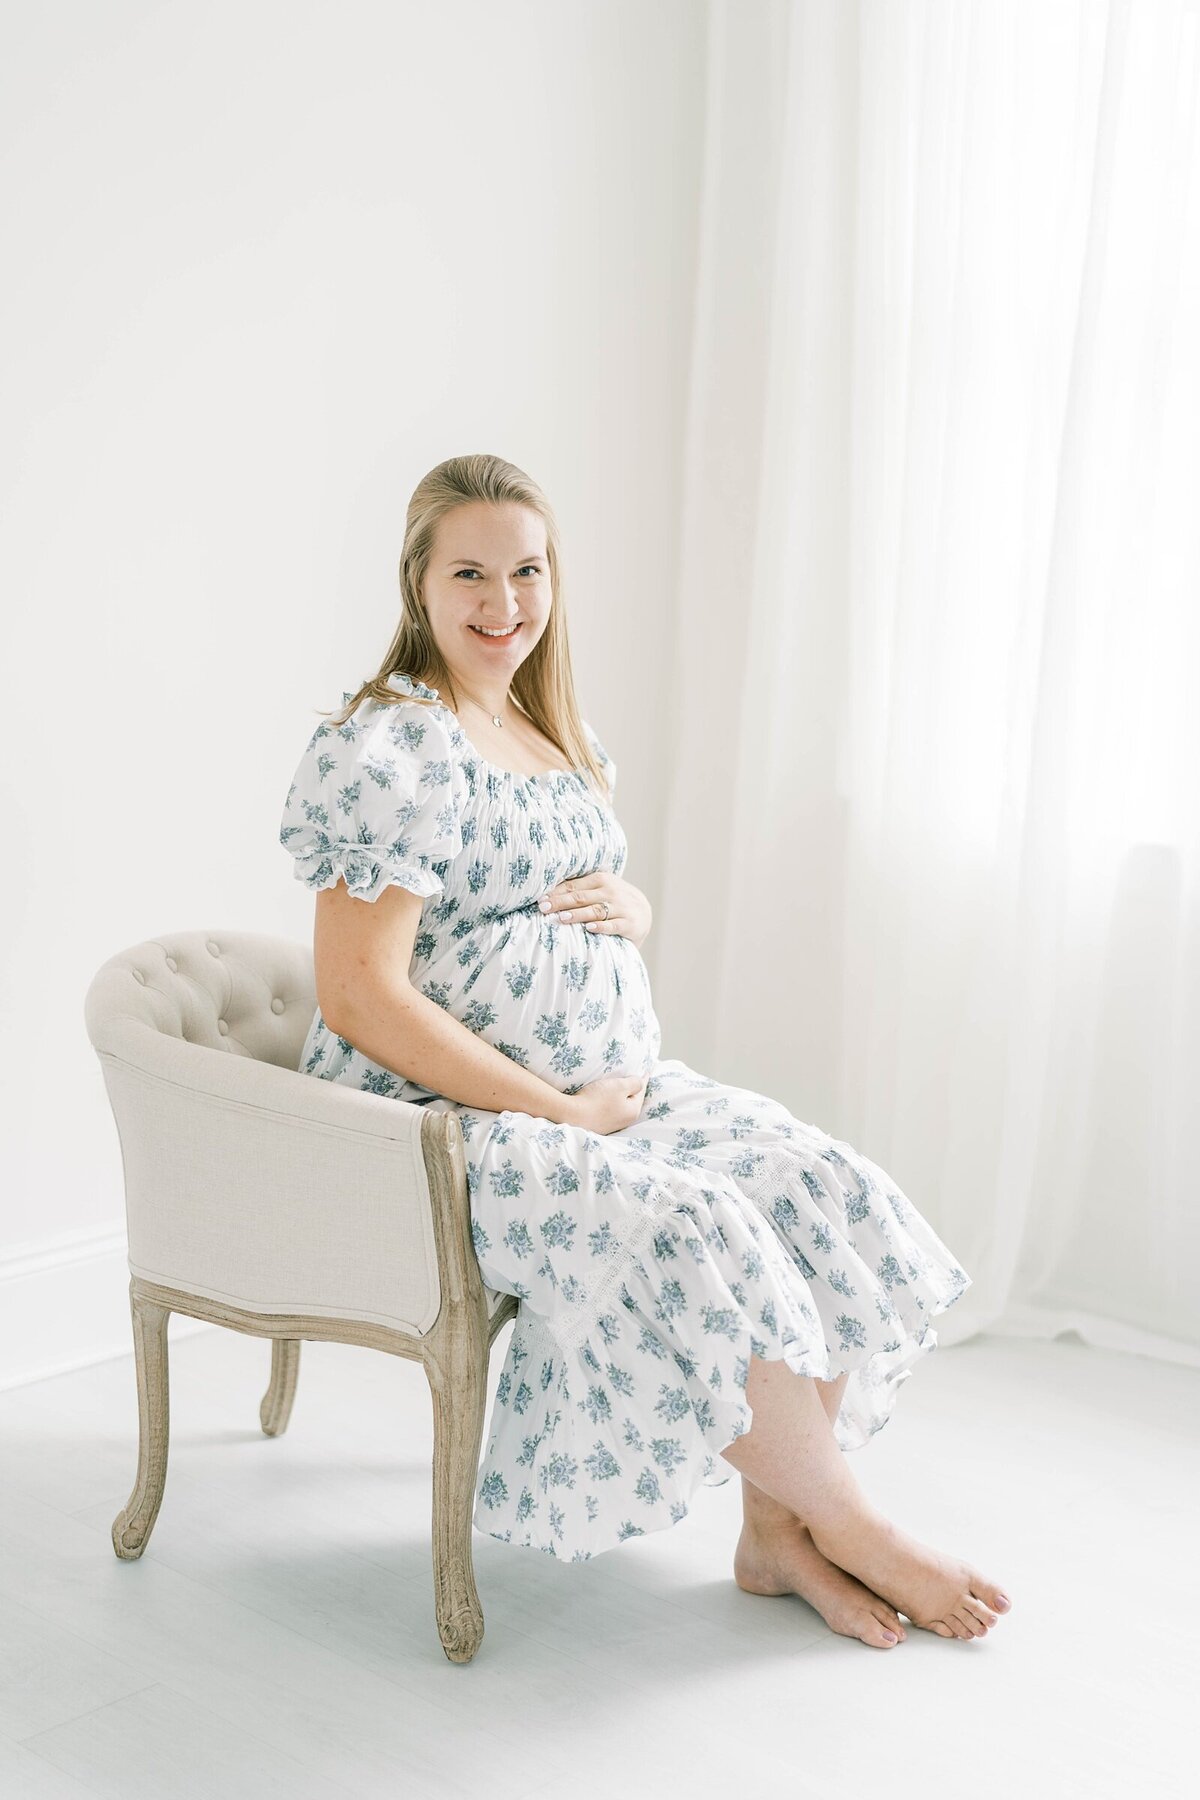 Roswell Maternity Photographer_0096